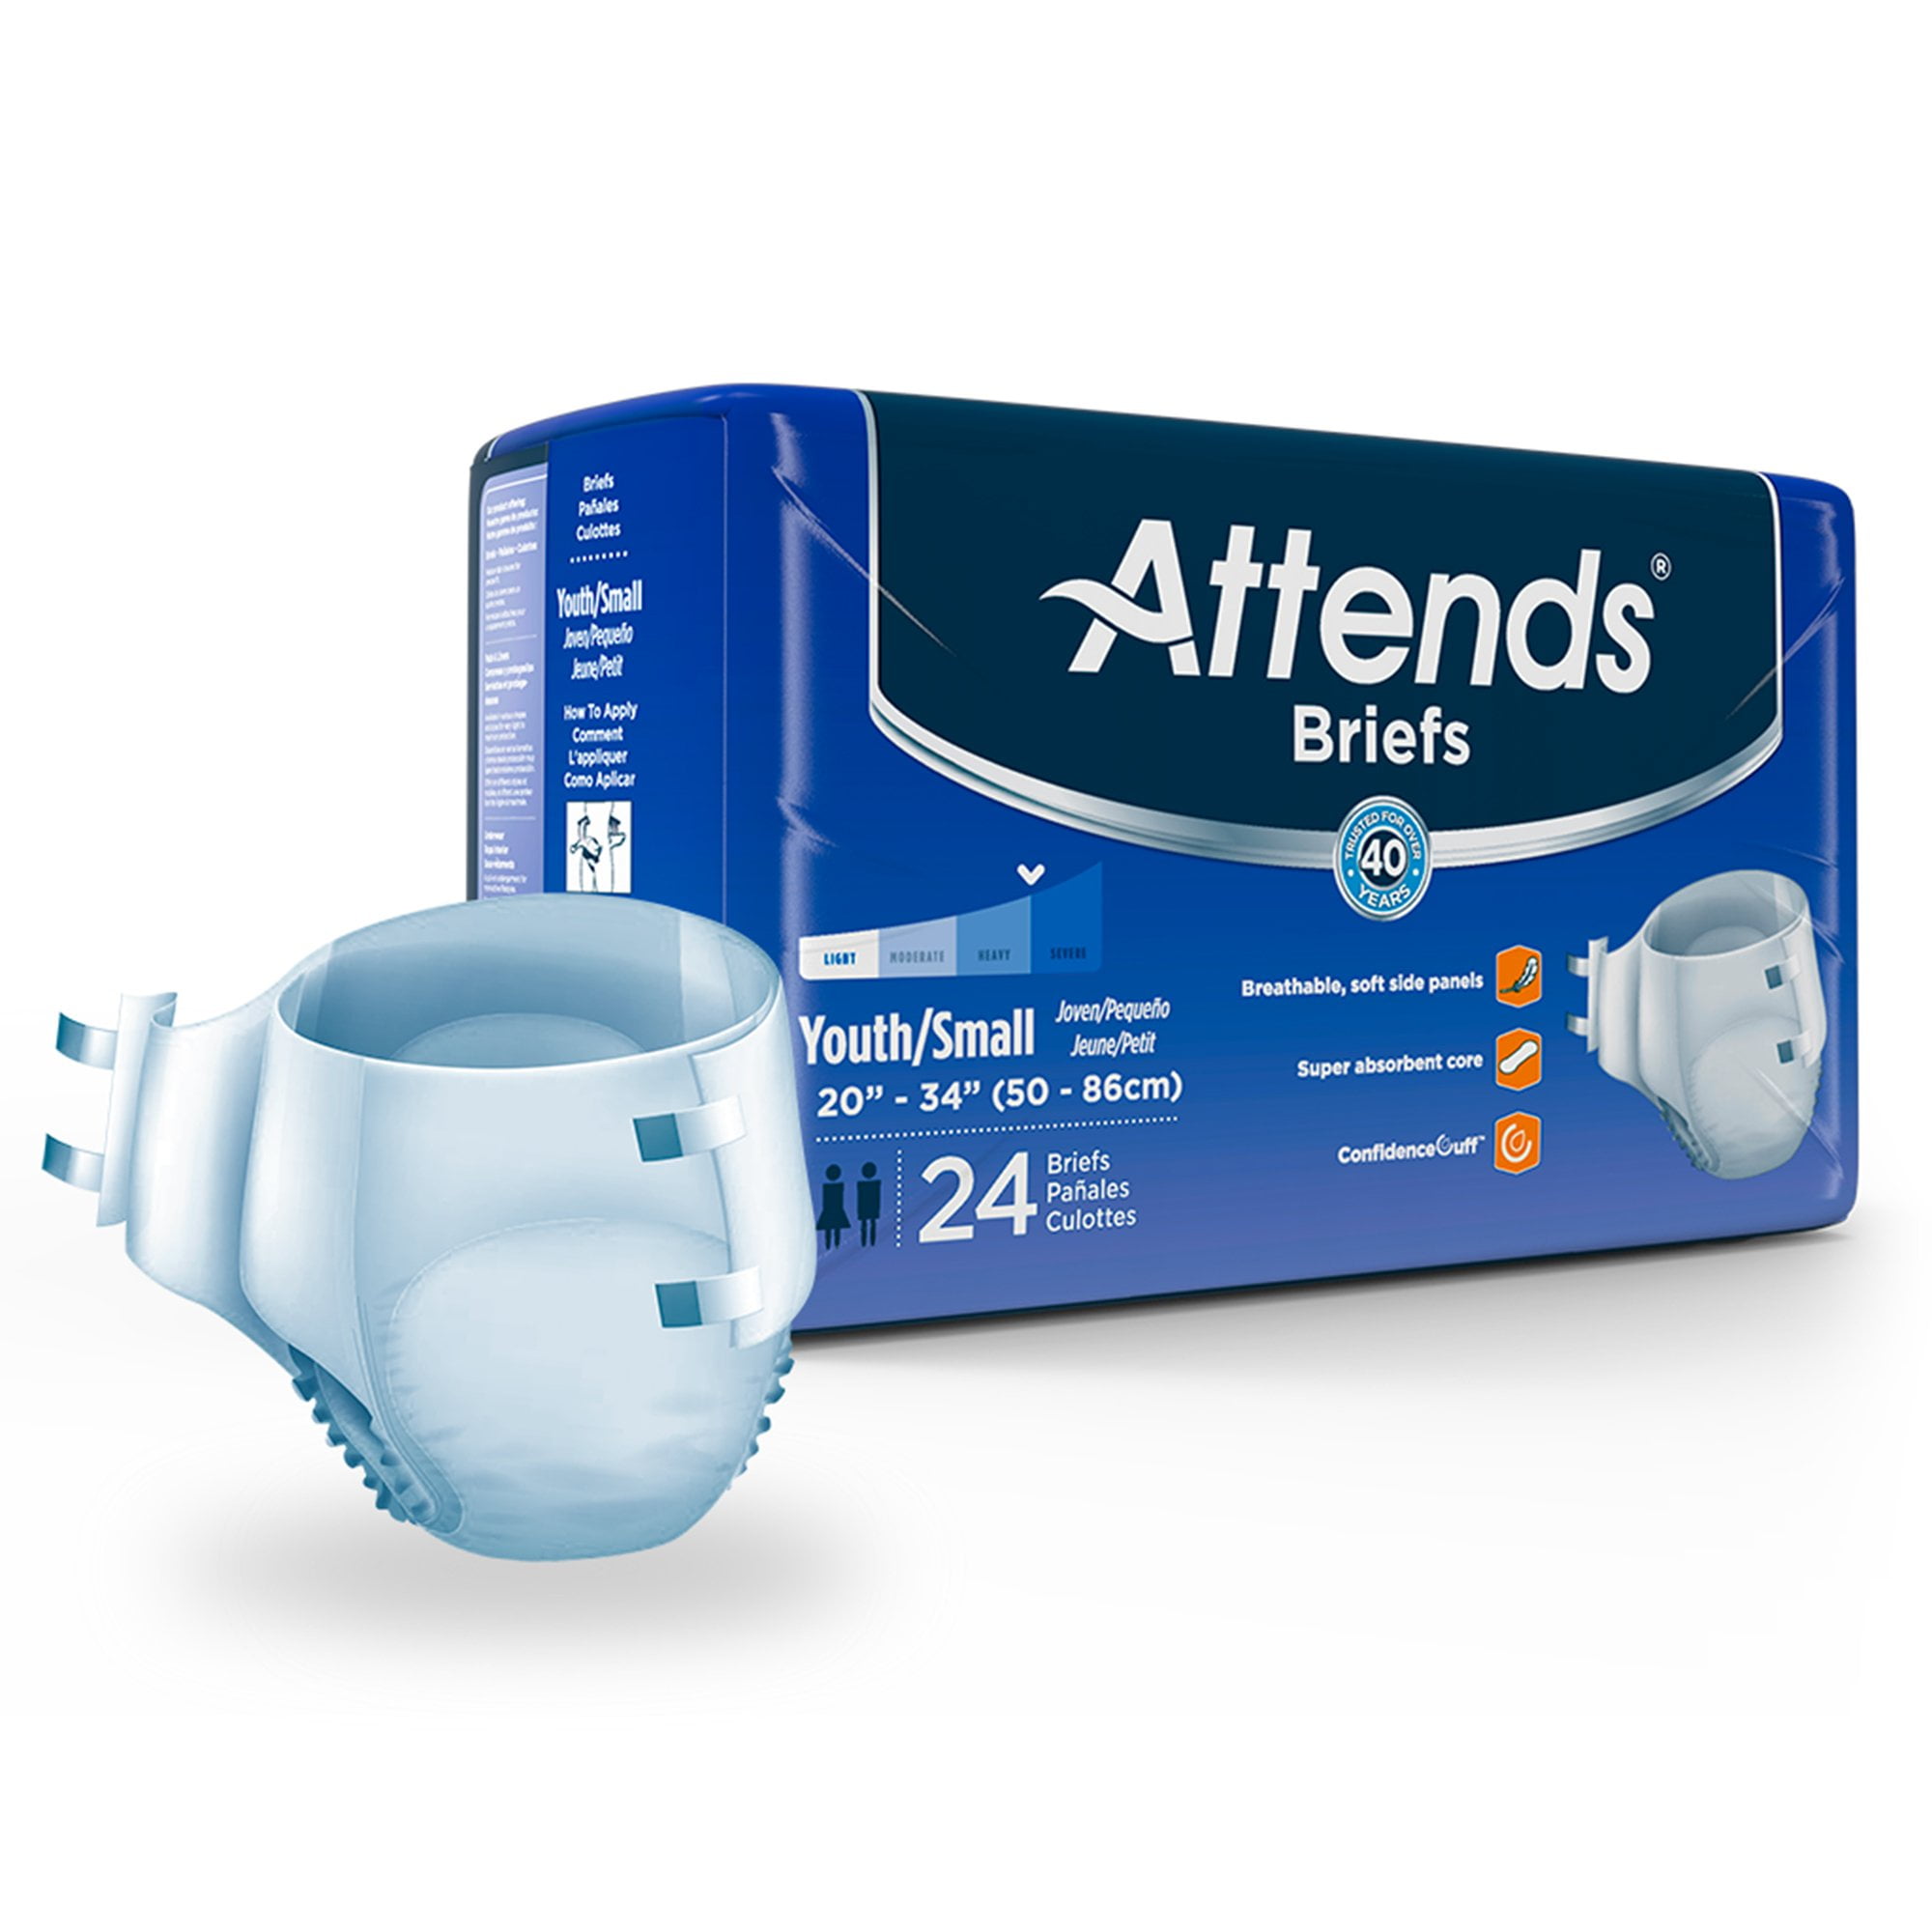 Attends Premier Incontinence Briefs, Premium Overnight Protection